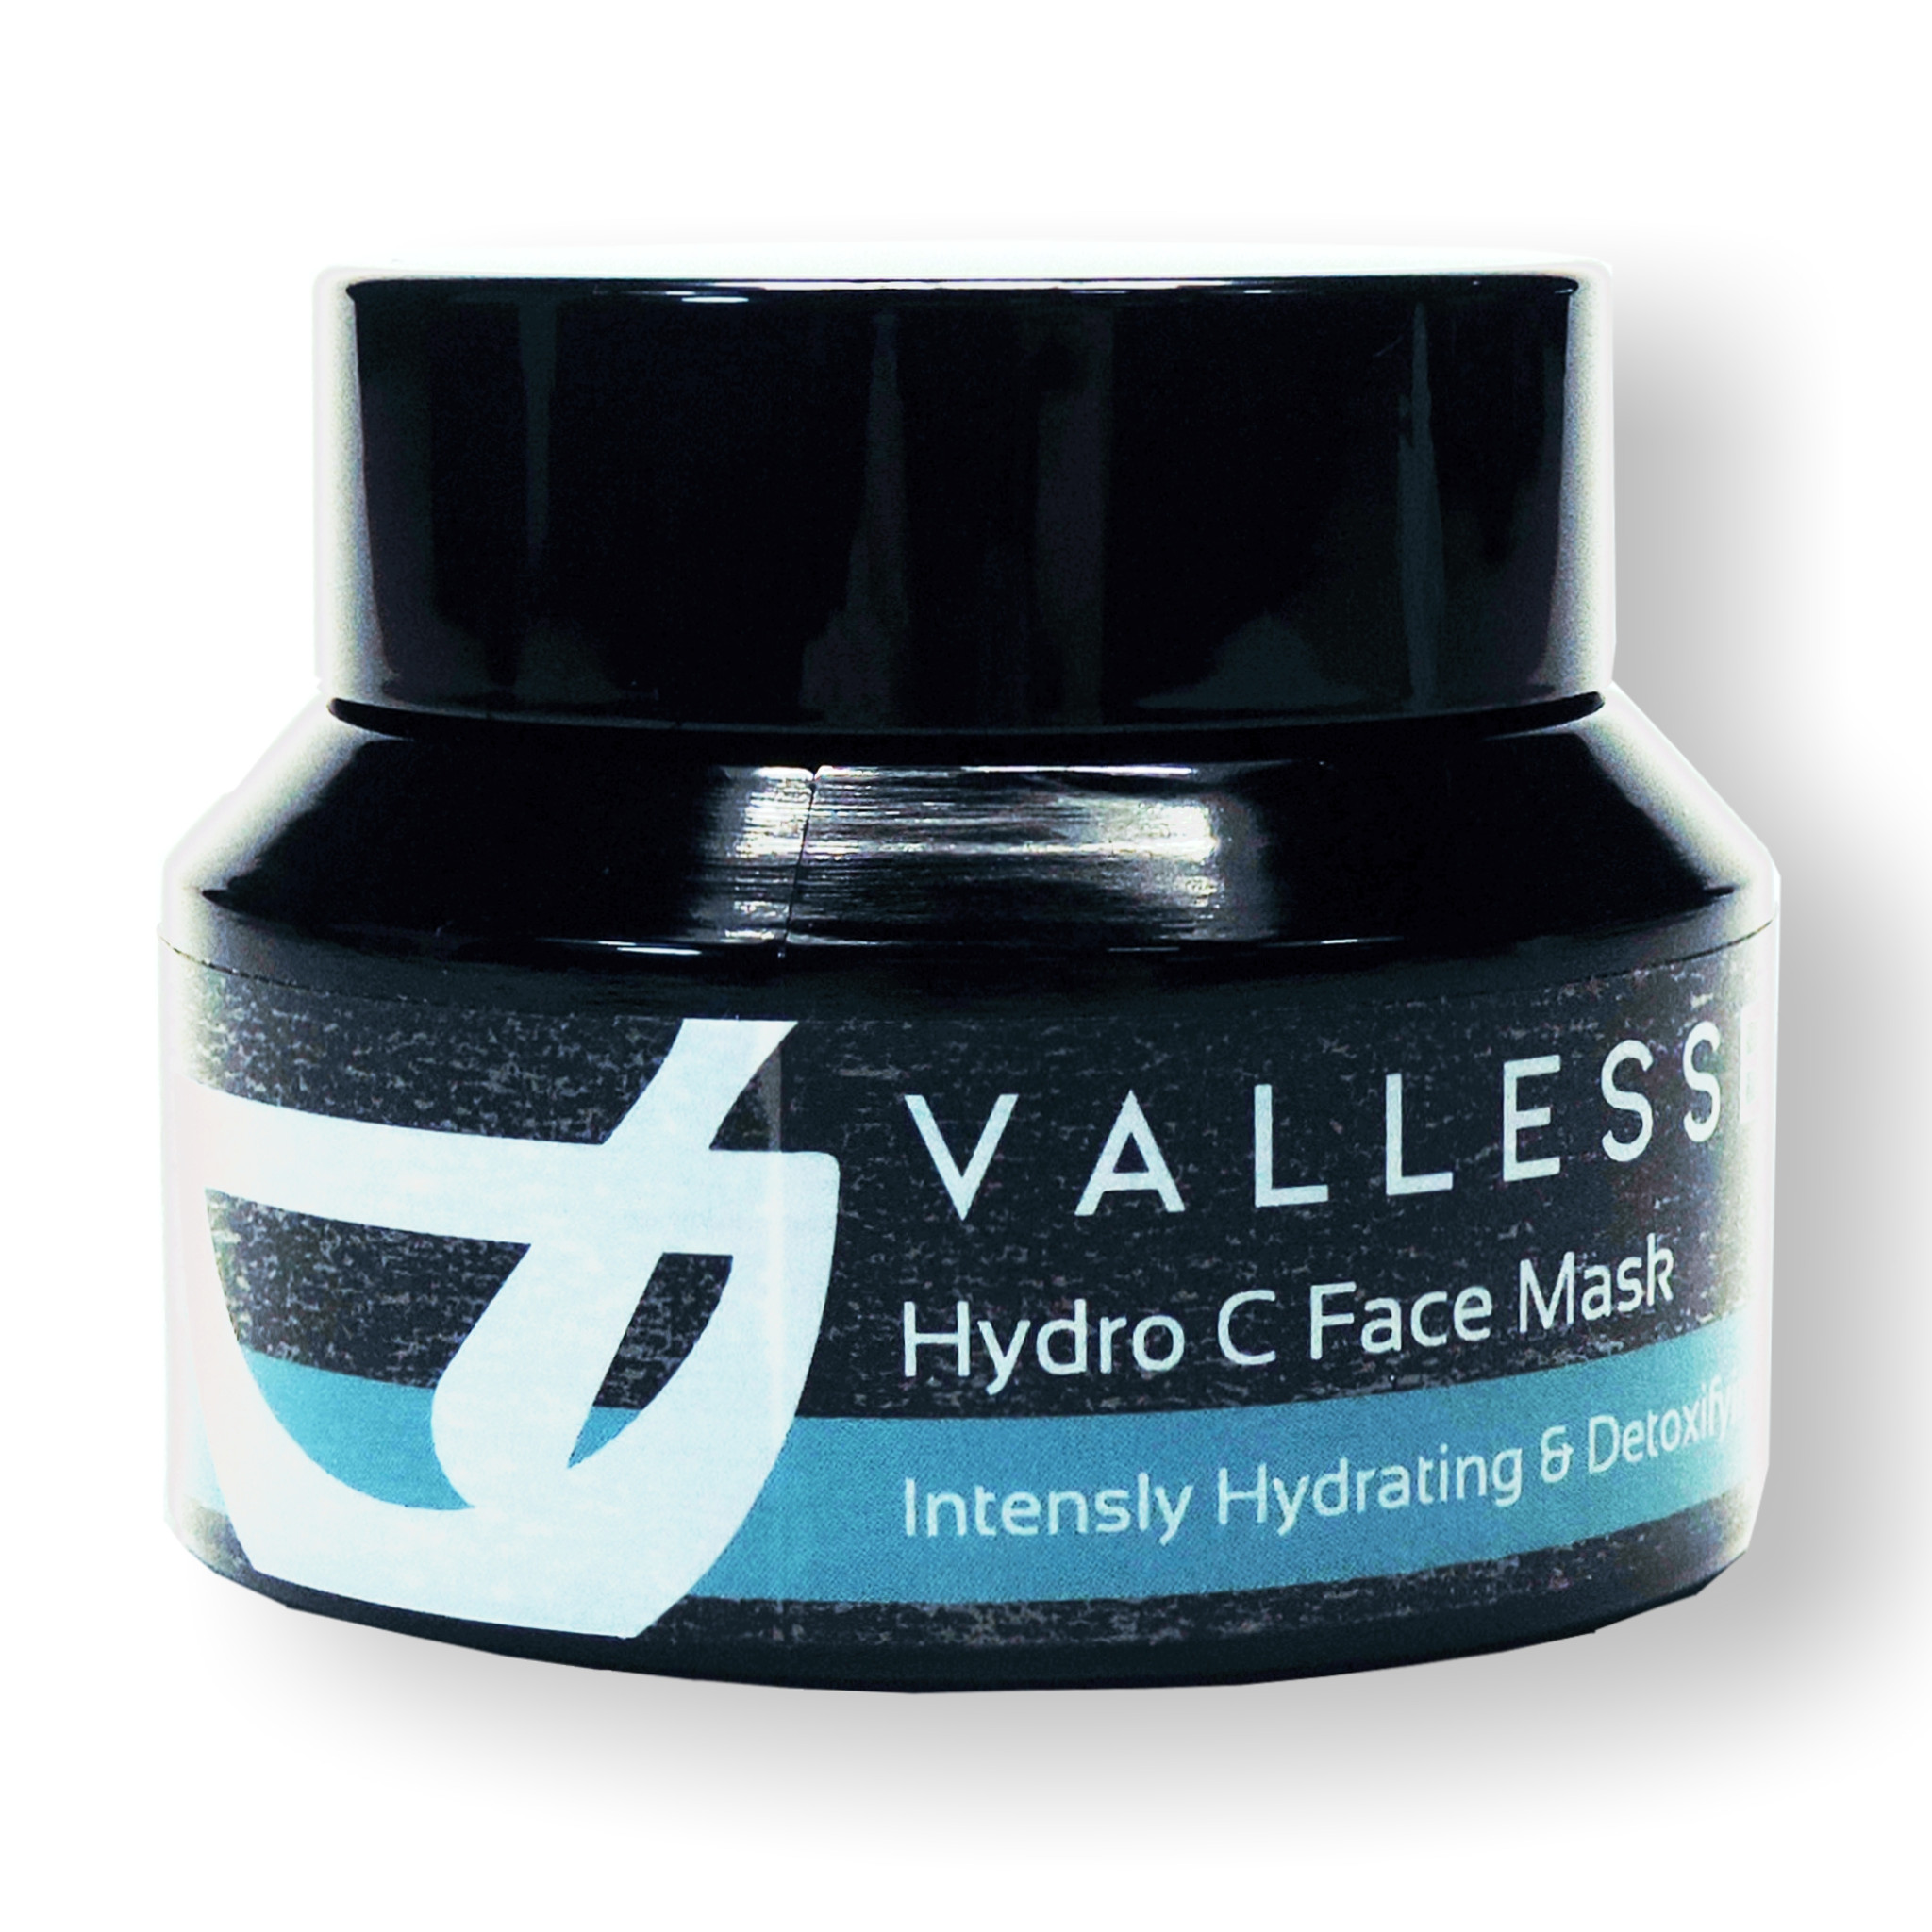 Hydro C Face Mask